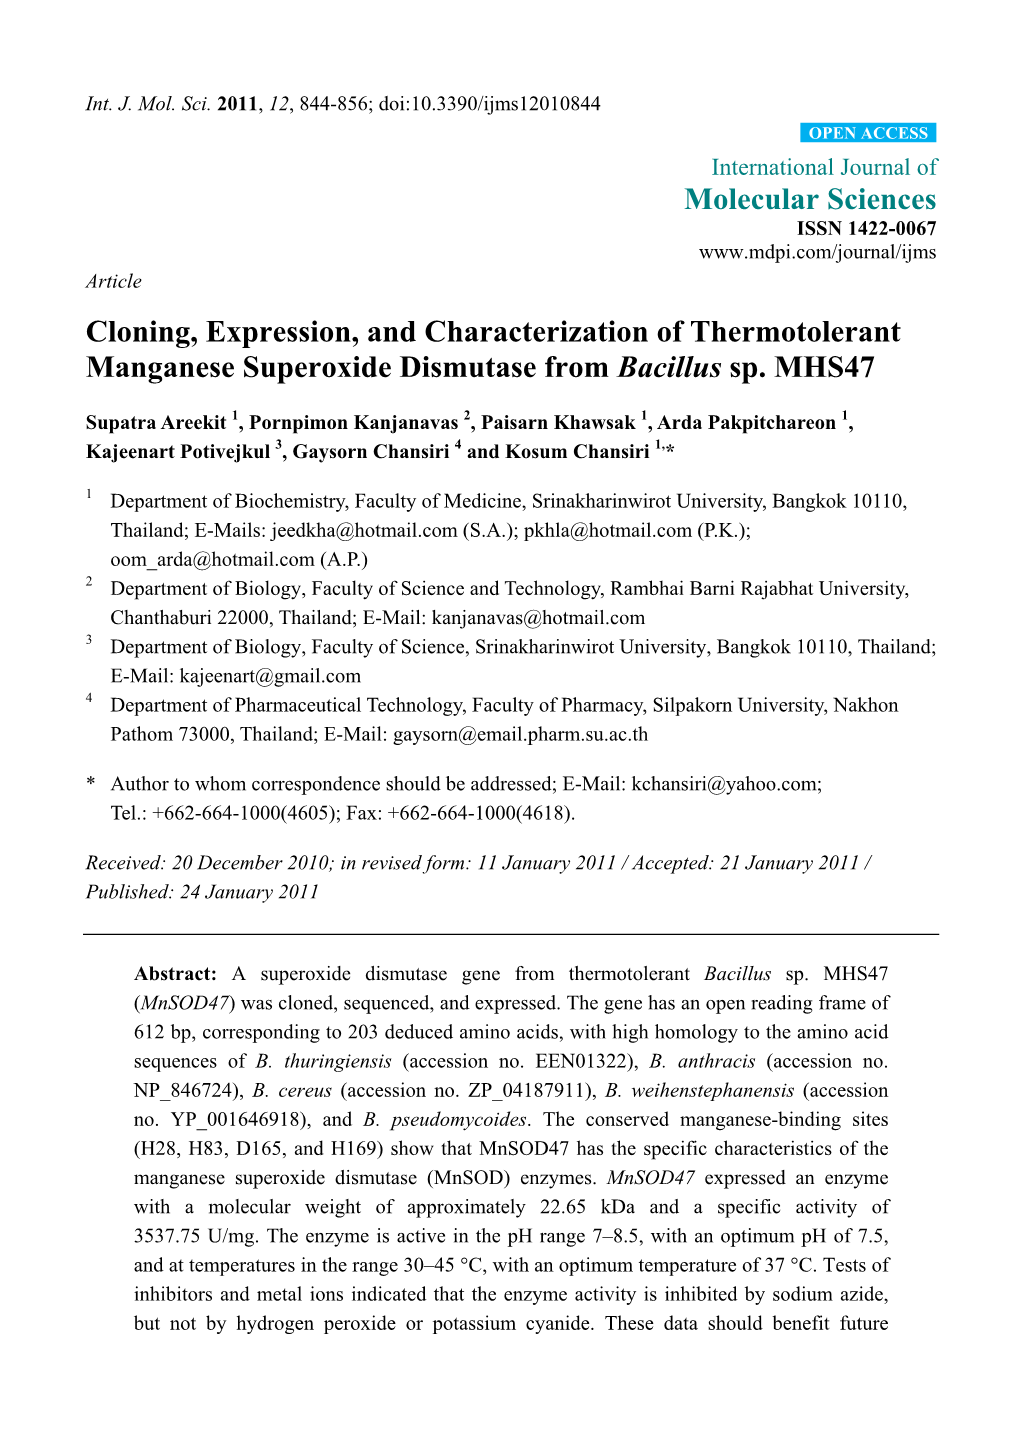 Cloning, Expression, and Characterization of Thermotolerant Manganese Superoxide Dismutase from Bacillus Sp